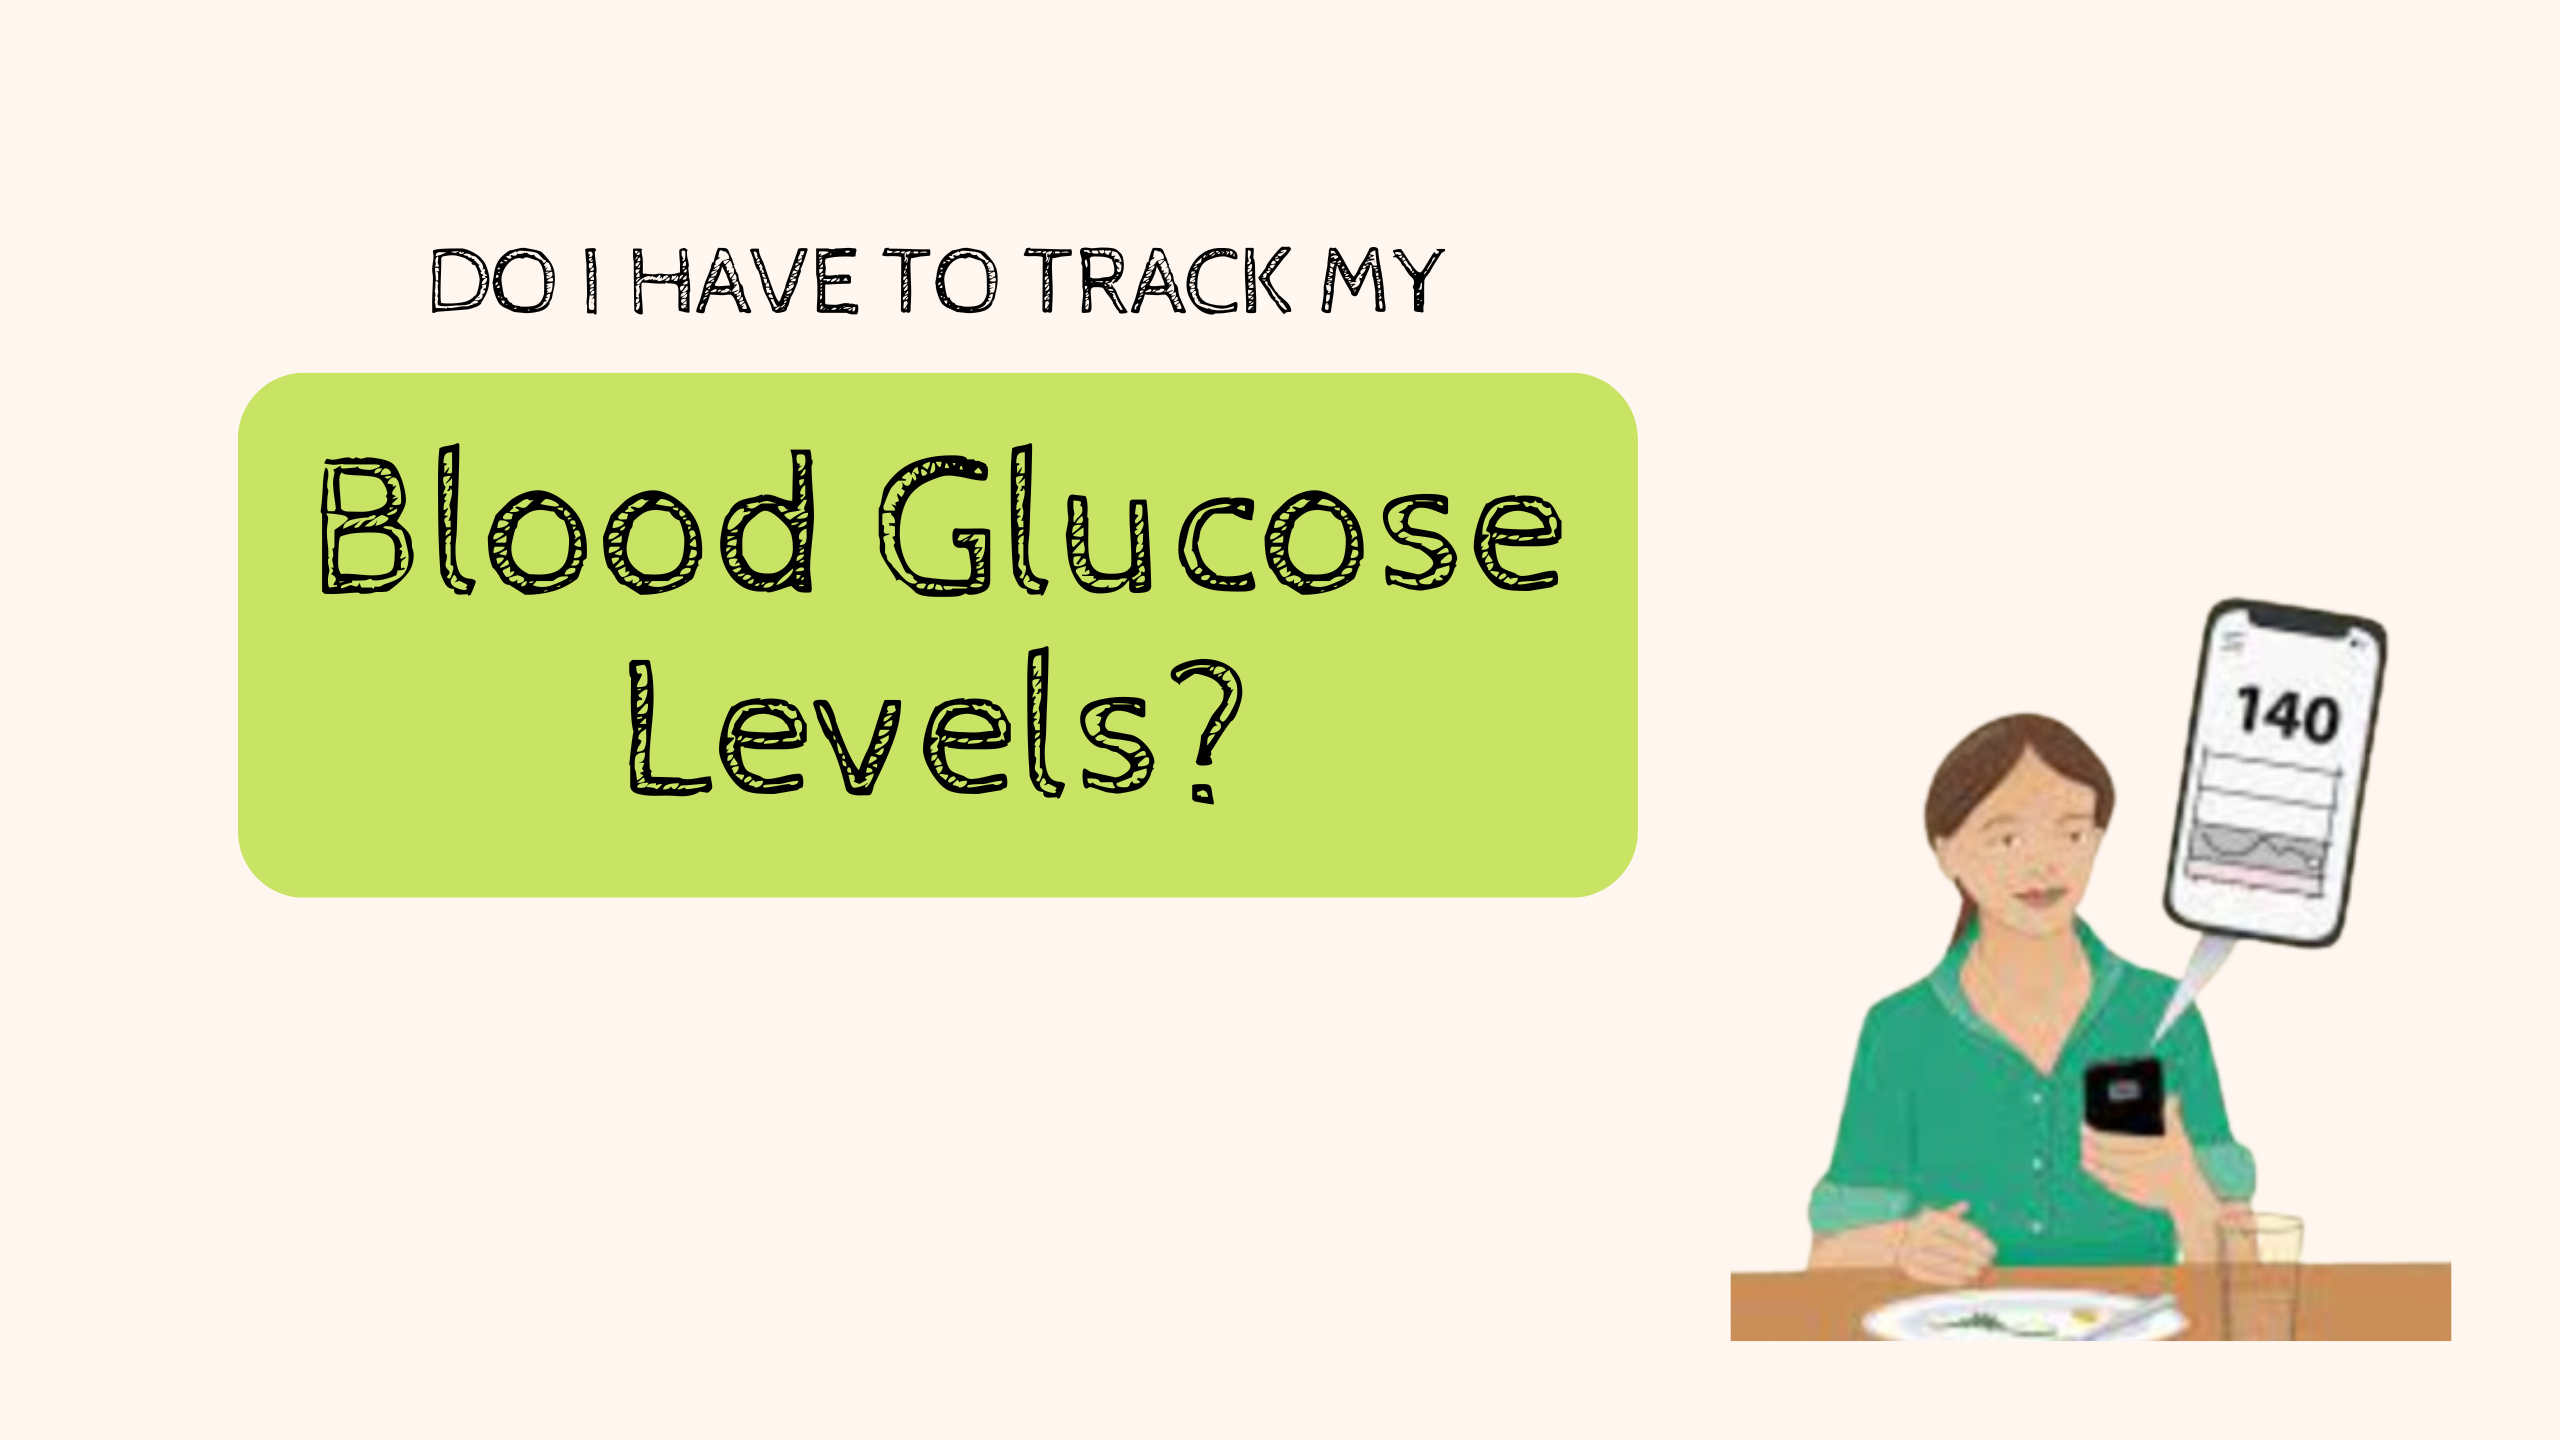 Do I have to track my blood glucose levels?